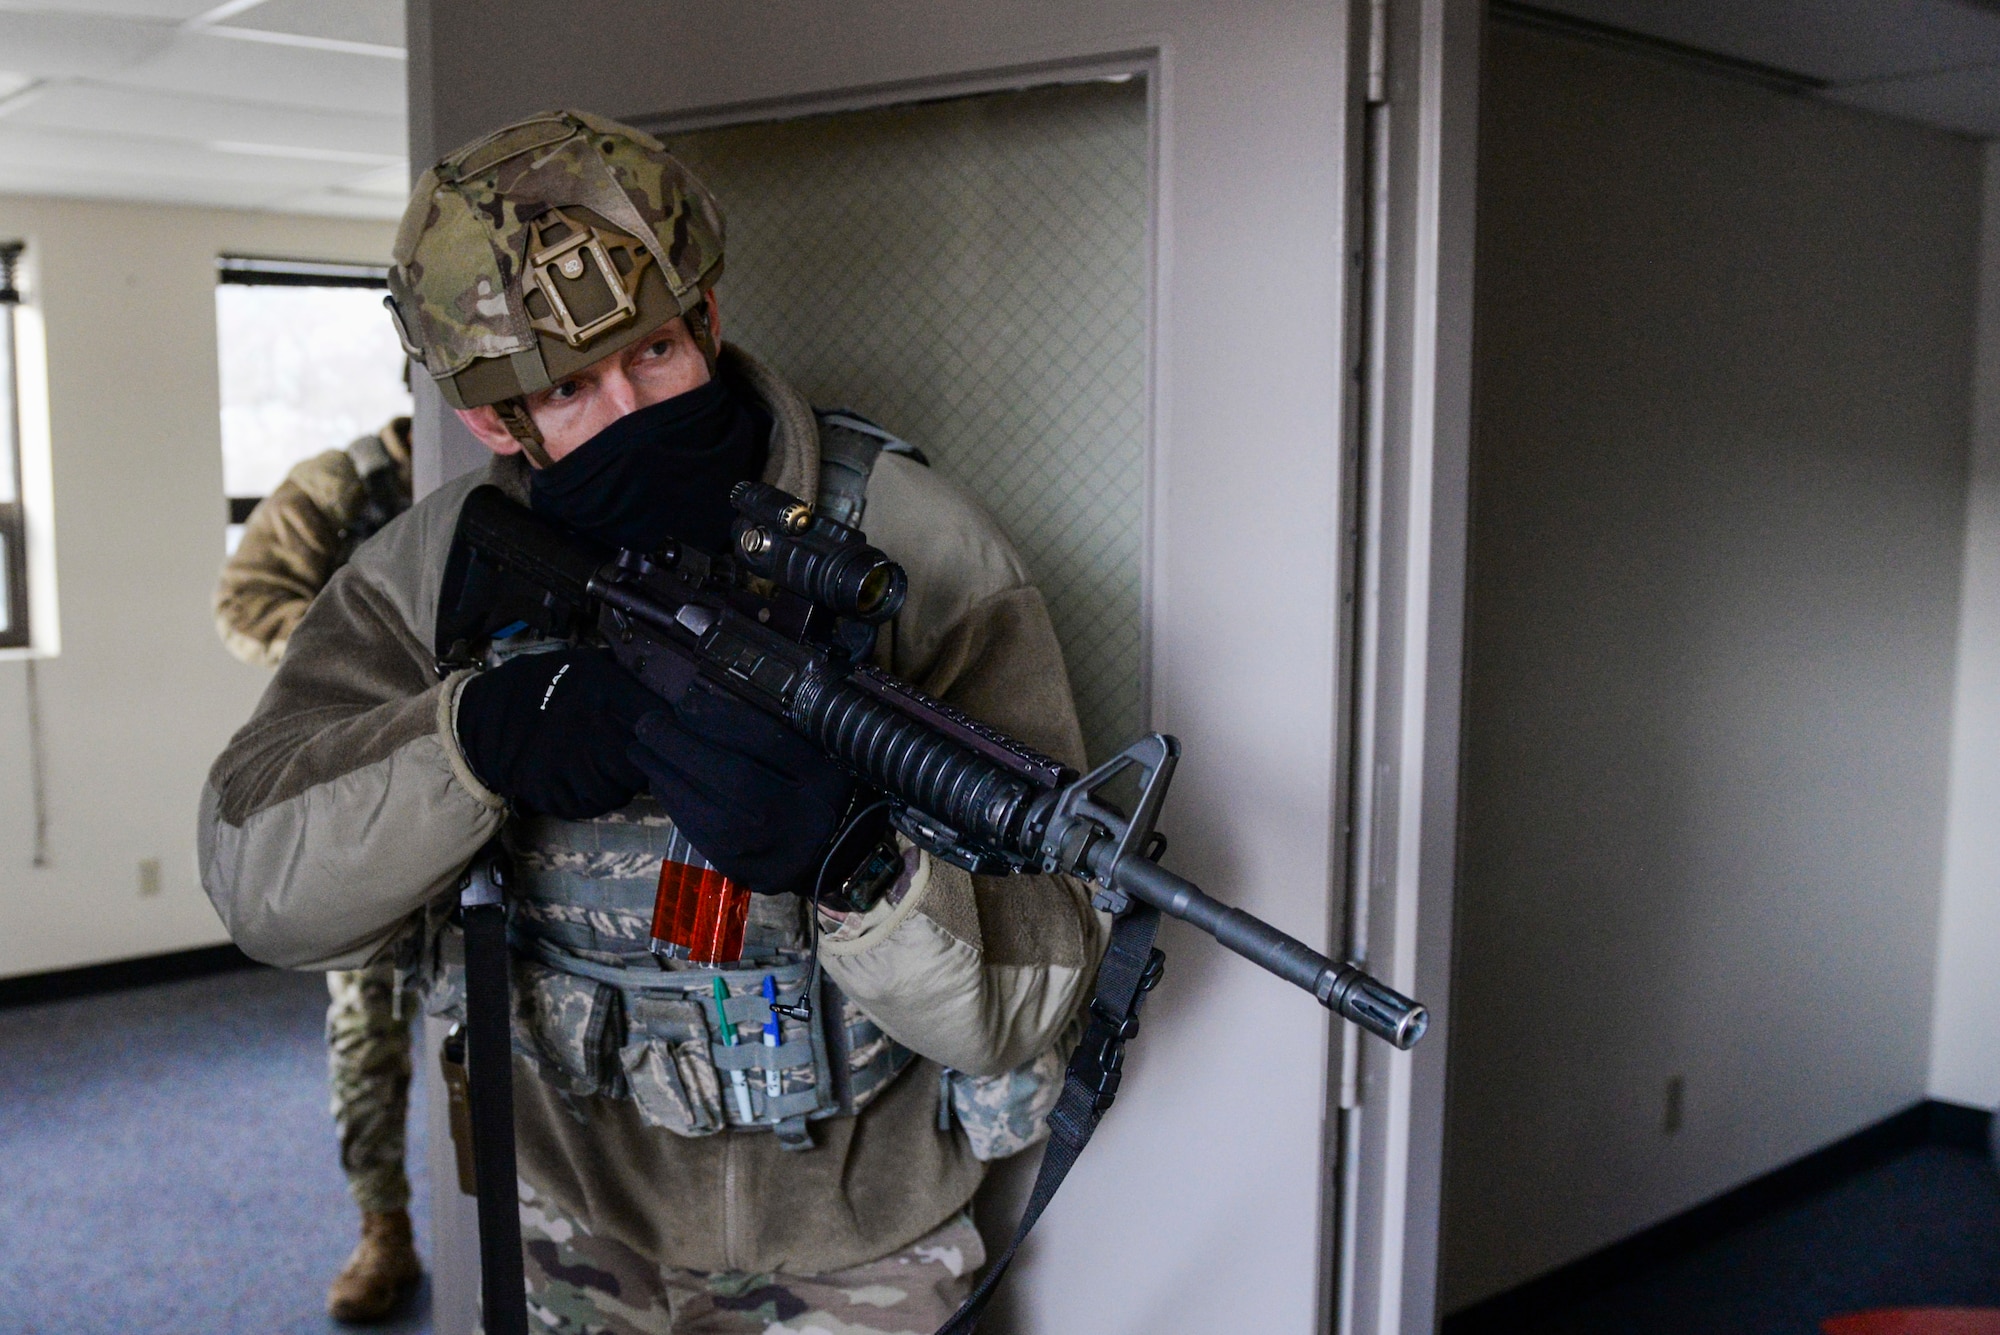 A member of the 88th Security Forces Squadron secures a room during an active-shooter exercise at Wright-Patterson Air Force Base, Ohio, Feb. 24, 2021. Readiness exercises are routinely held to streamline unit cohesion when responding to emergencies. (U.S. Air Force photo by Wesley Farnsworth)